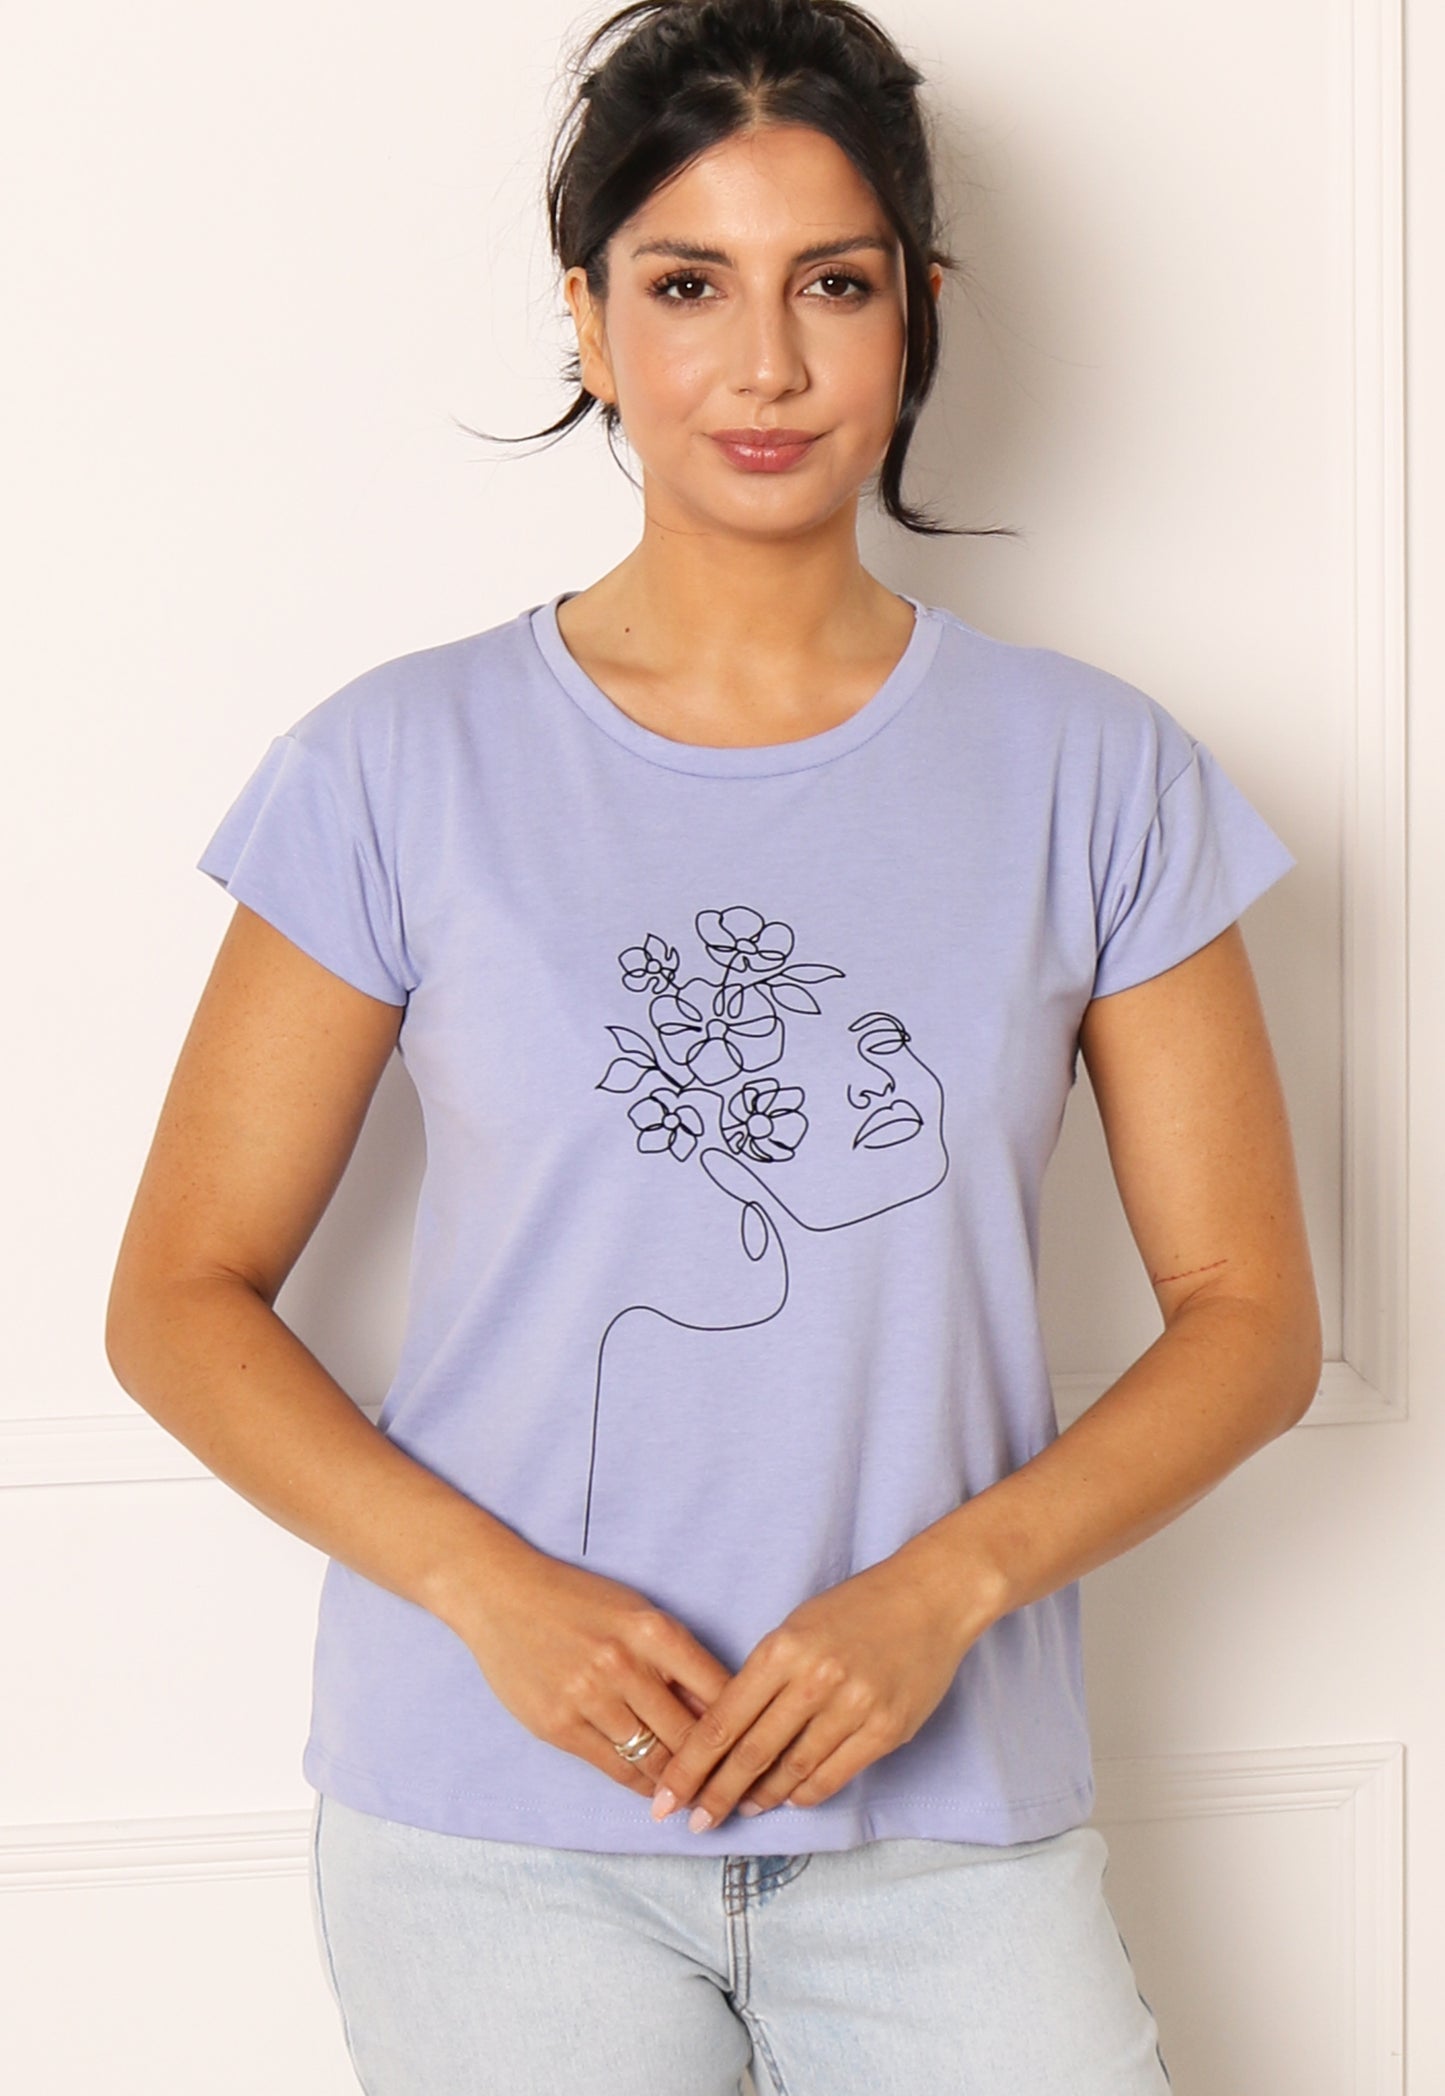 VILA Abstract One Line Woman's Face Drawing T-shirt in Light Blue - One Nation Clothing